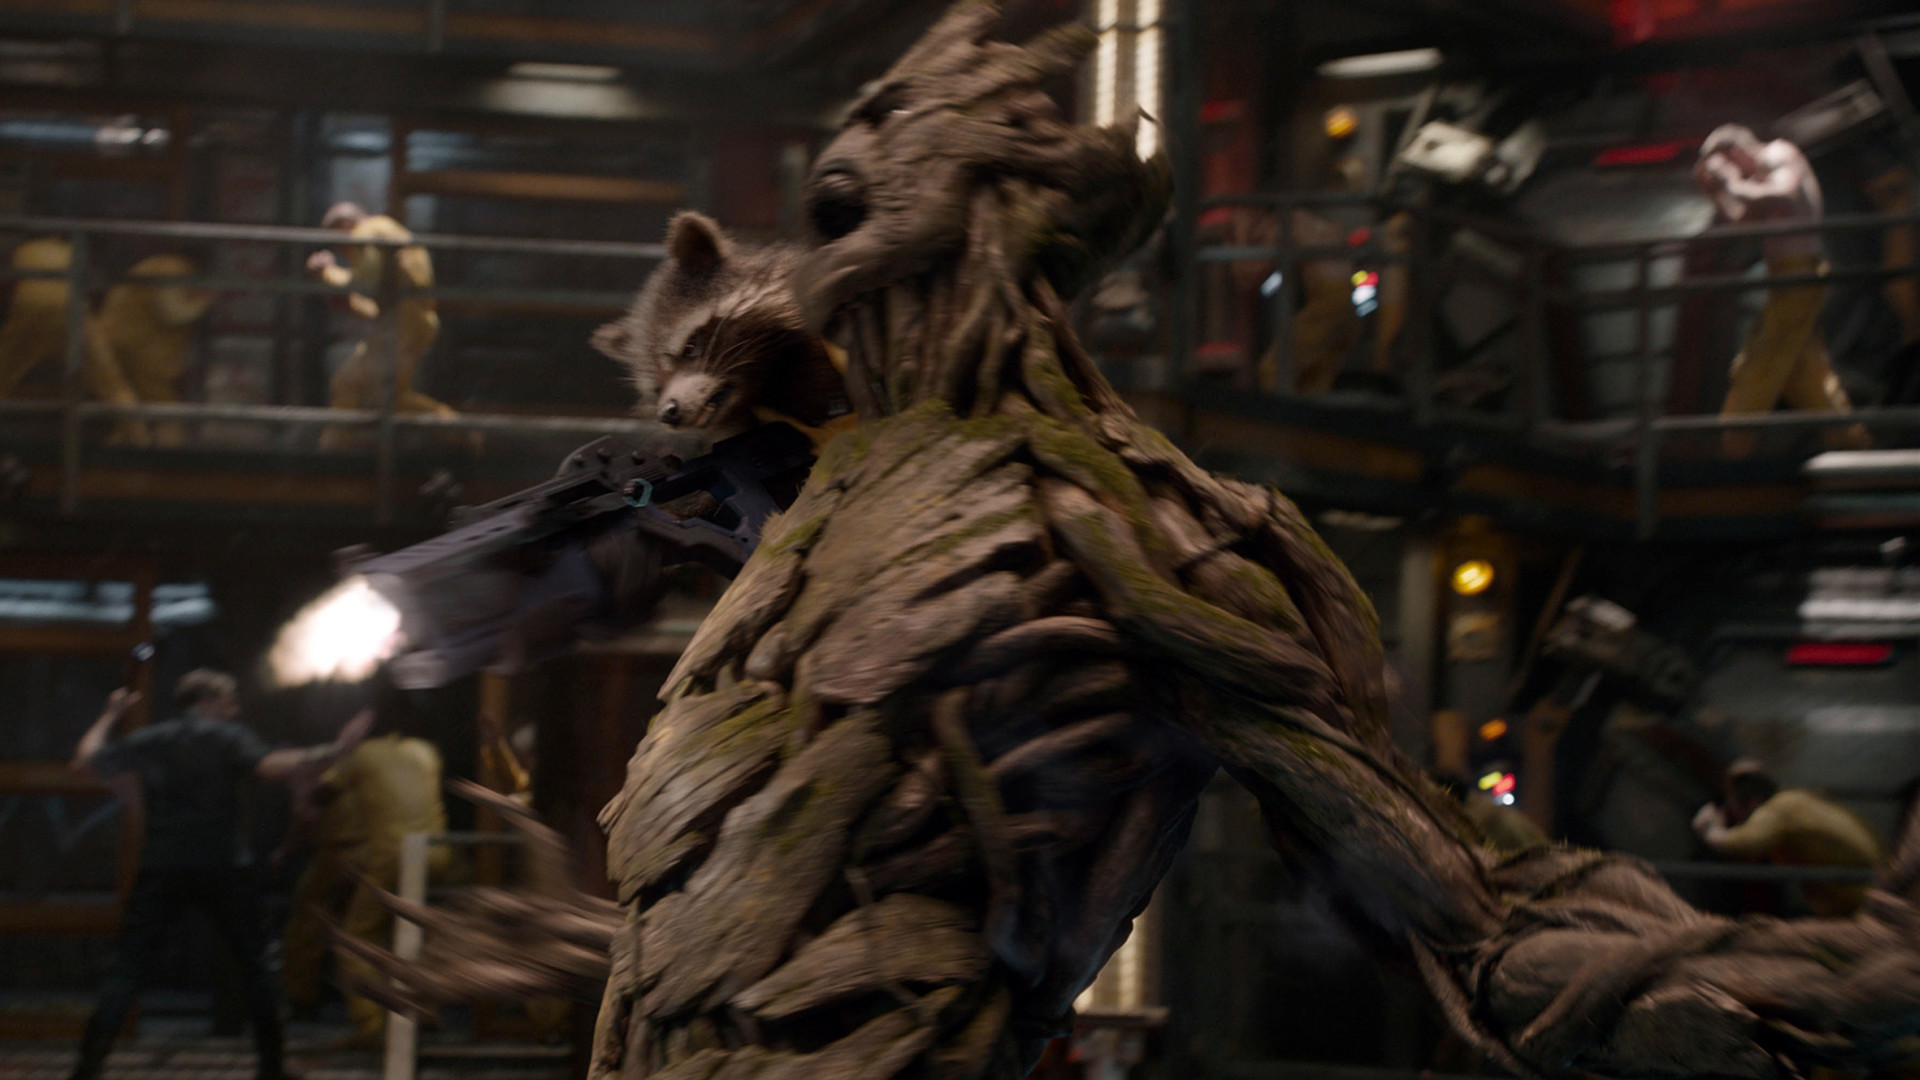 1920x1080 groot and rocket raccoon in guardians of the galaxy movie